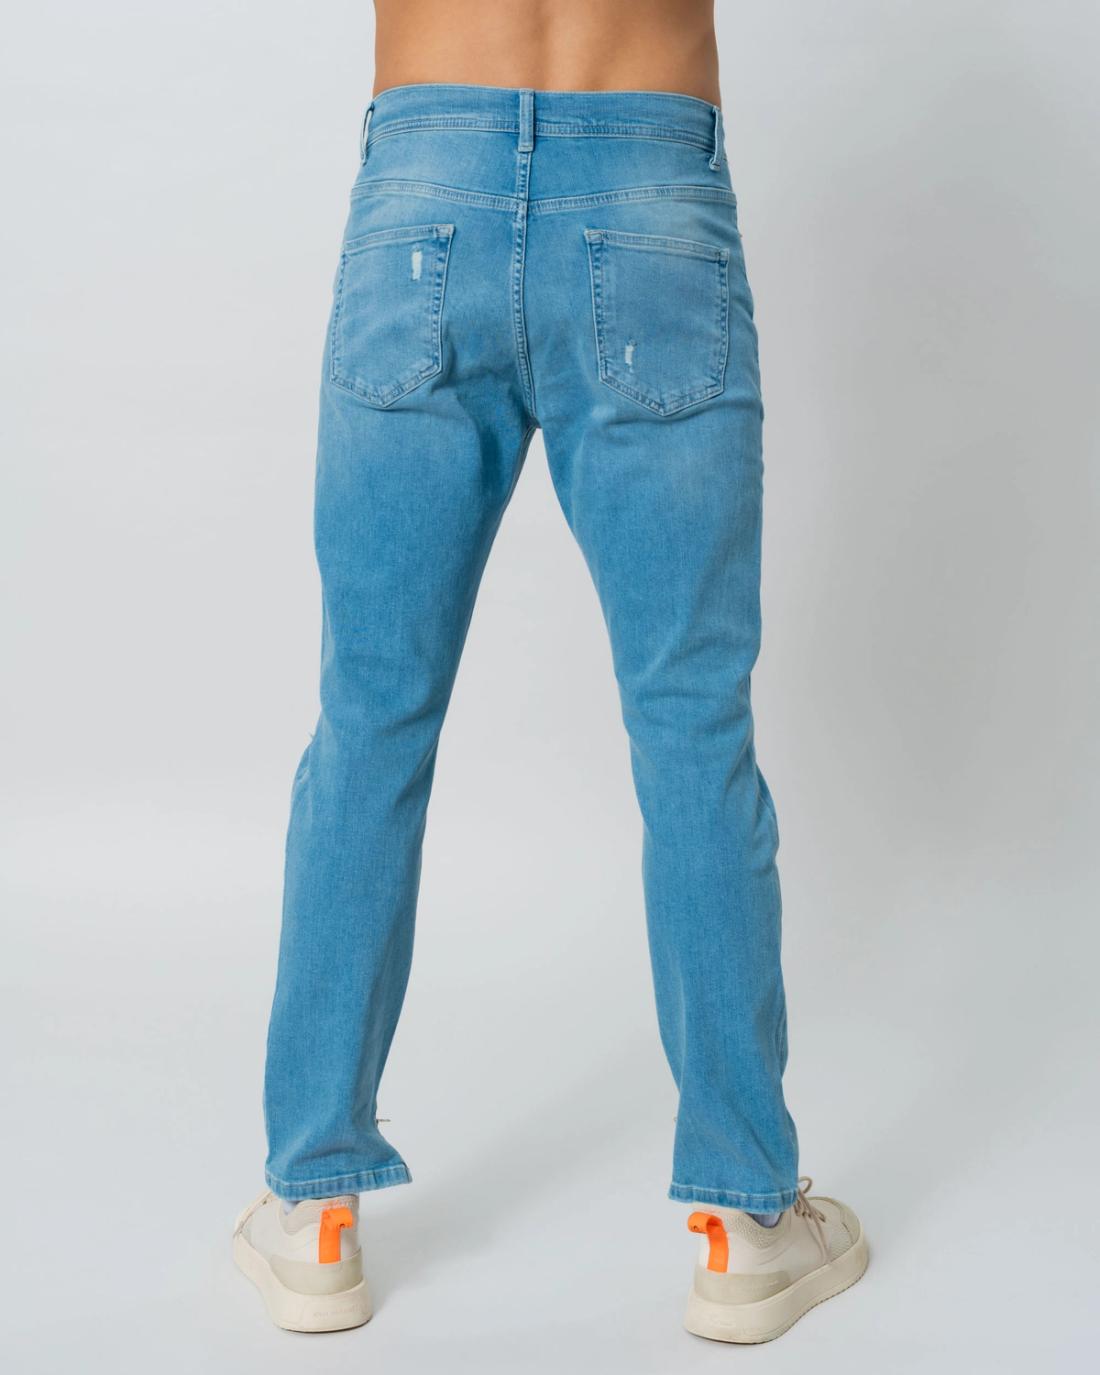 The Jeans With c'est normal - Around